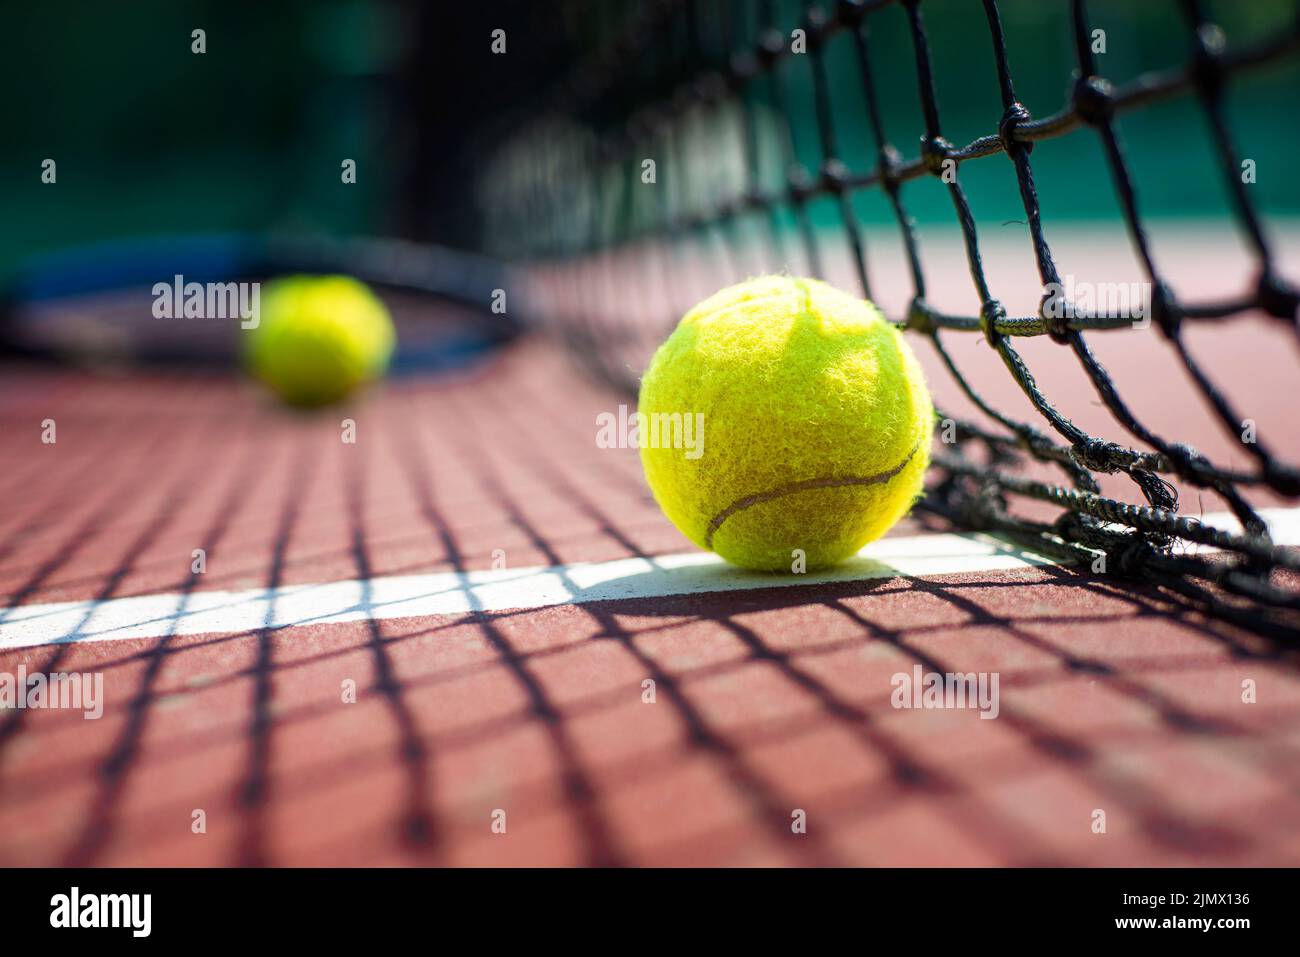 Tennis ball lying on the court. Healthy lifestyle concept Stock Photo